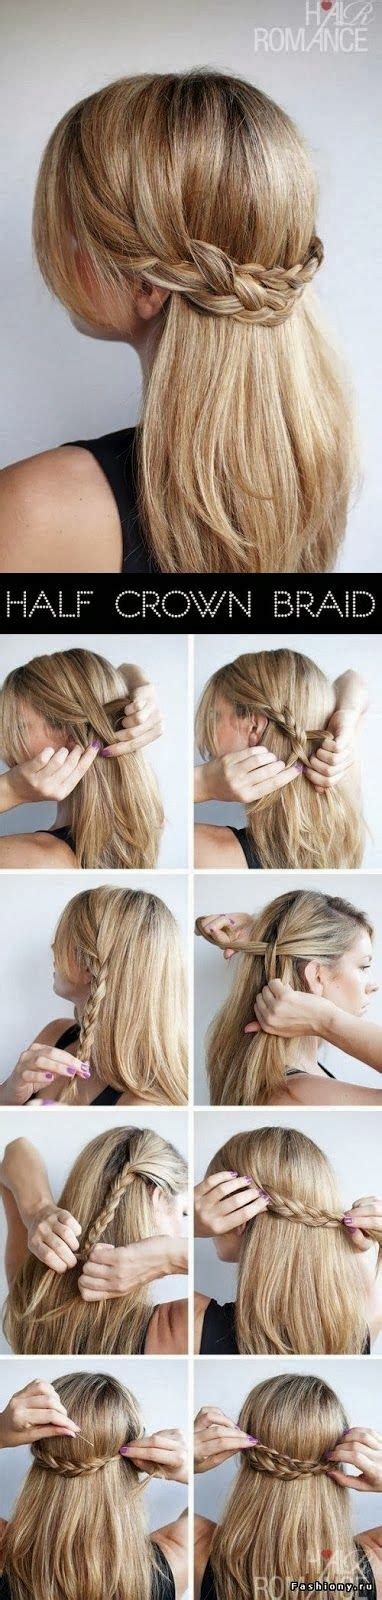 15 Easy Hairstyle Tutorials For All Occasions Styles Weekly